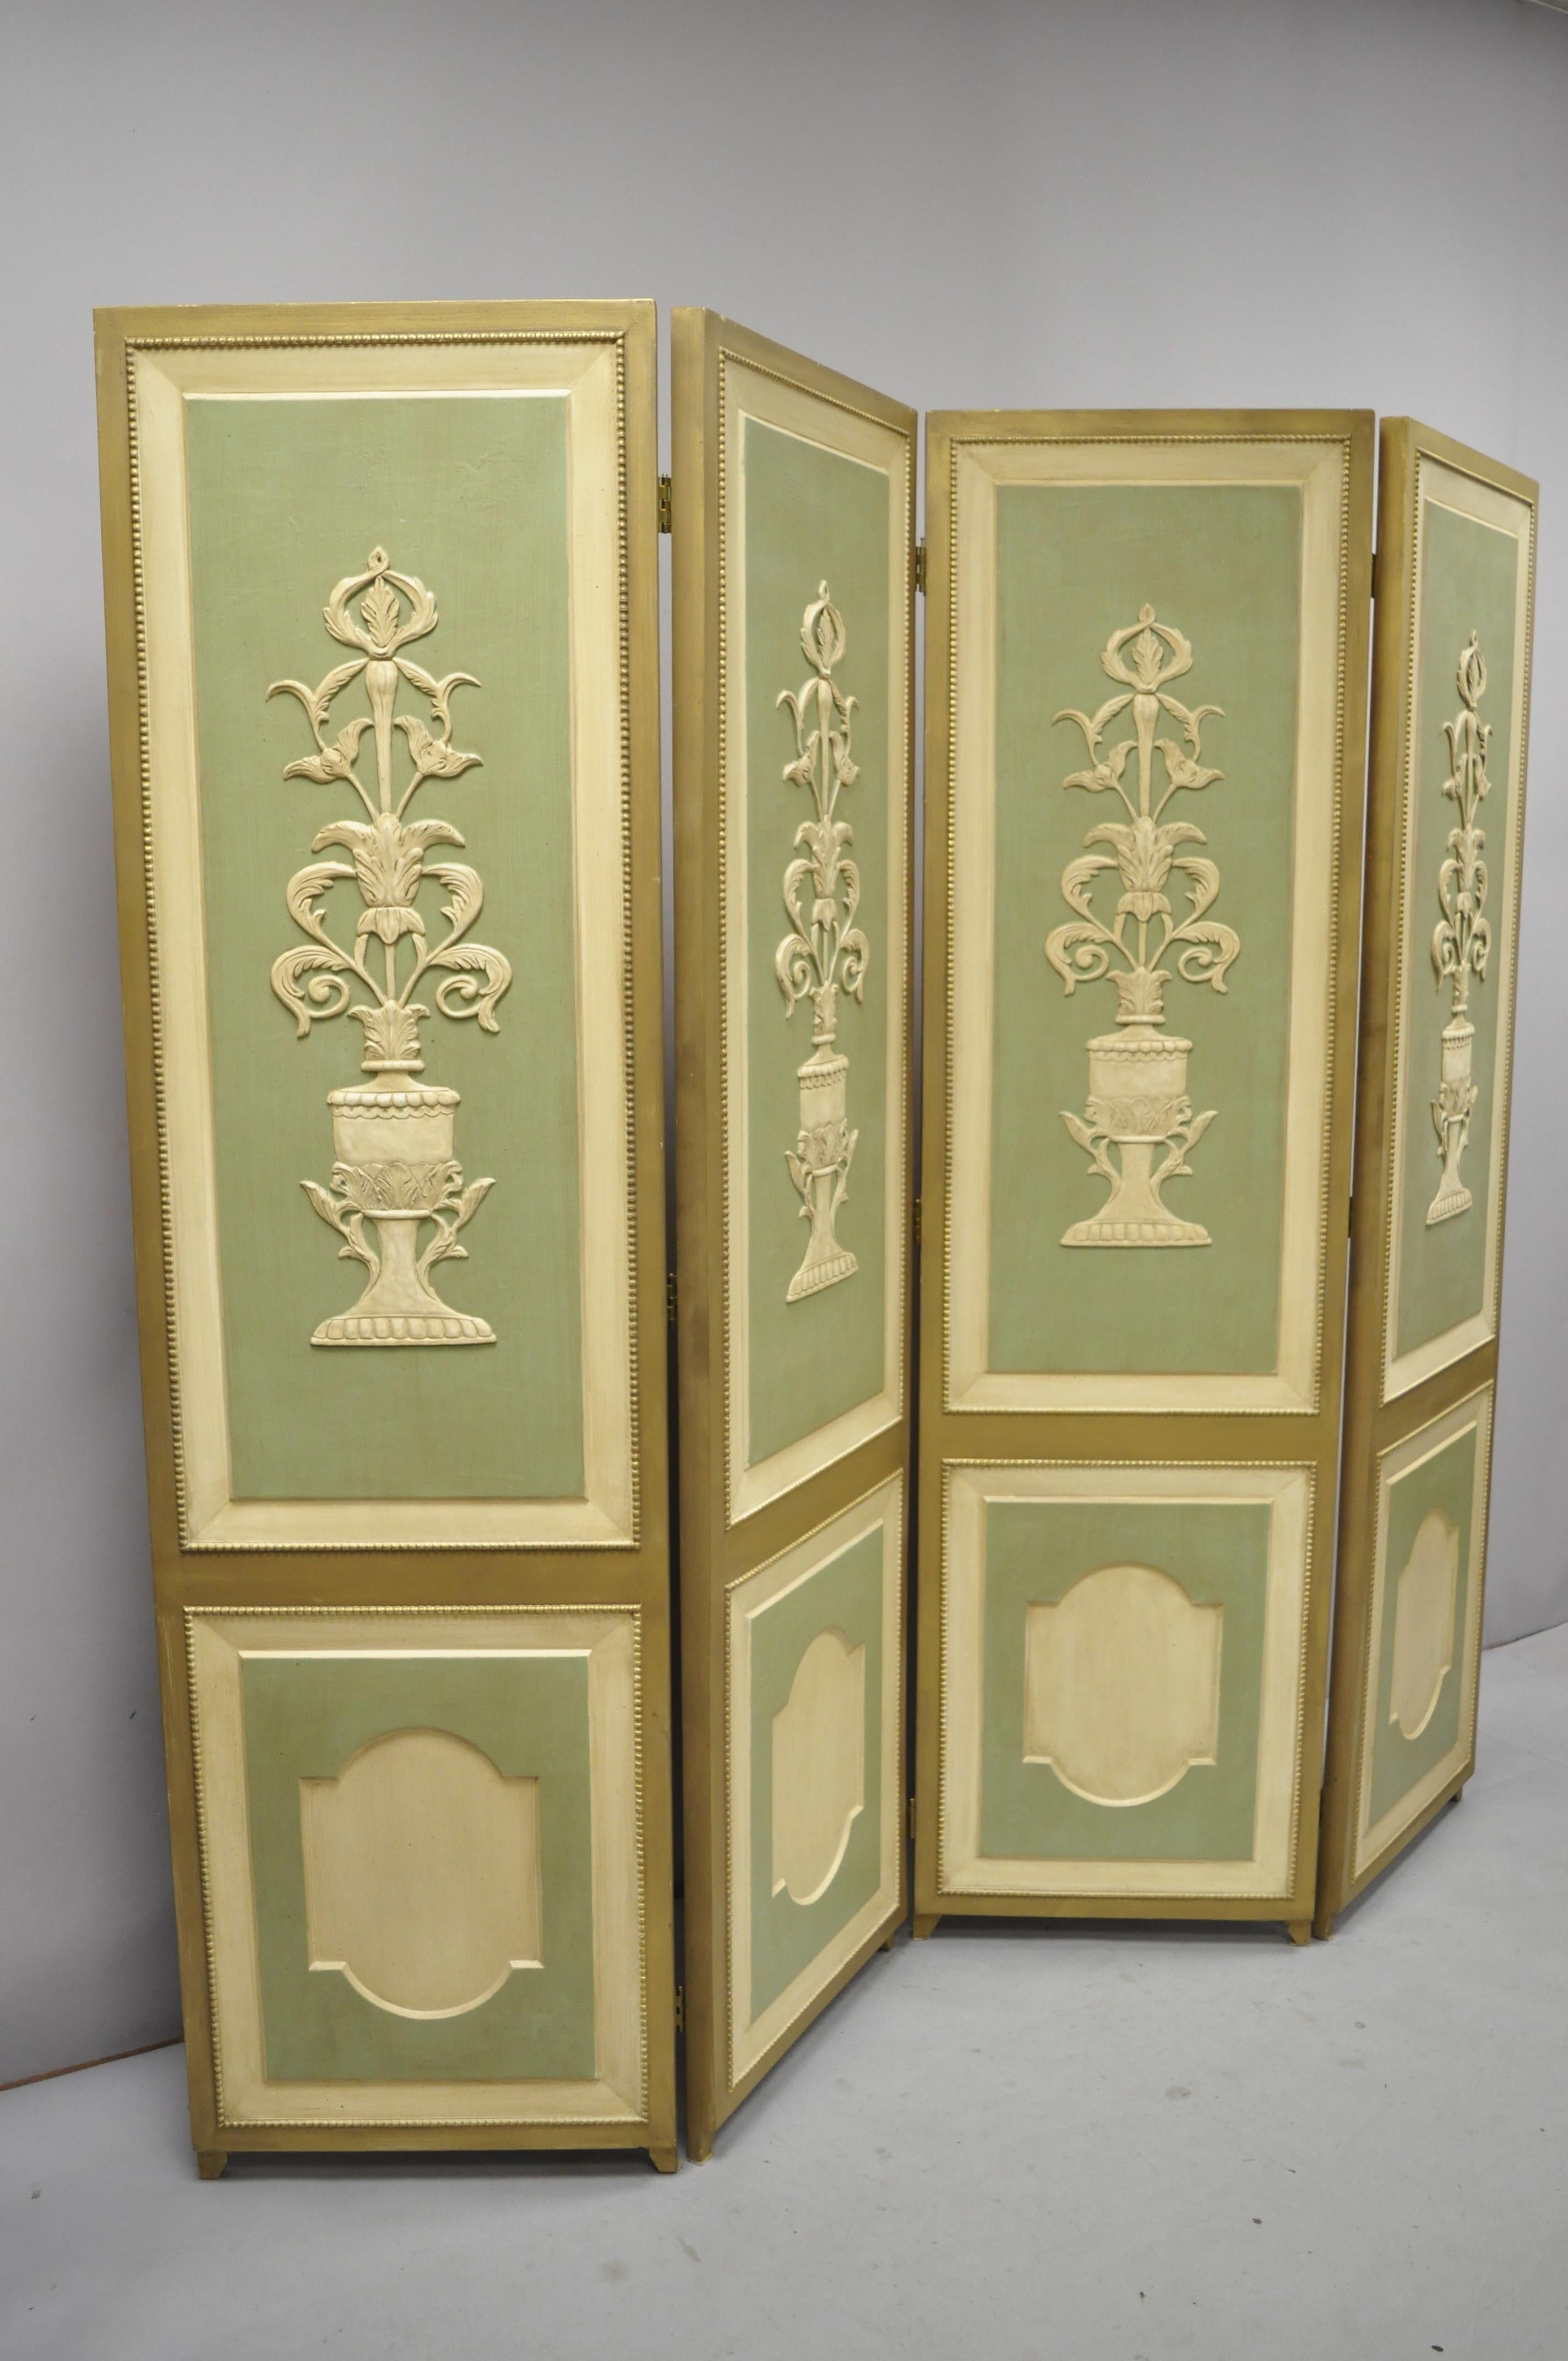 Italian neoclassical green and gold 4-panel section carved urn and flower folding screen.
Item includes carved wood panels of flowers and urns, 4 folding panels, distressed finish, very nice antique item, great style and form, circa mid-20th